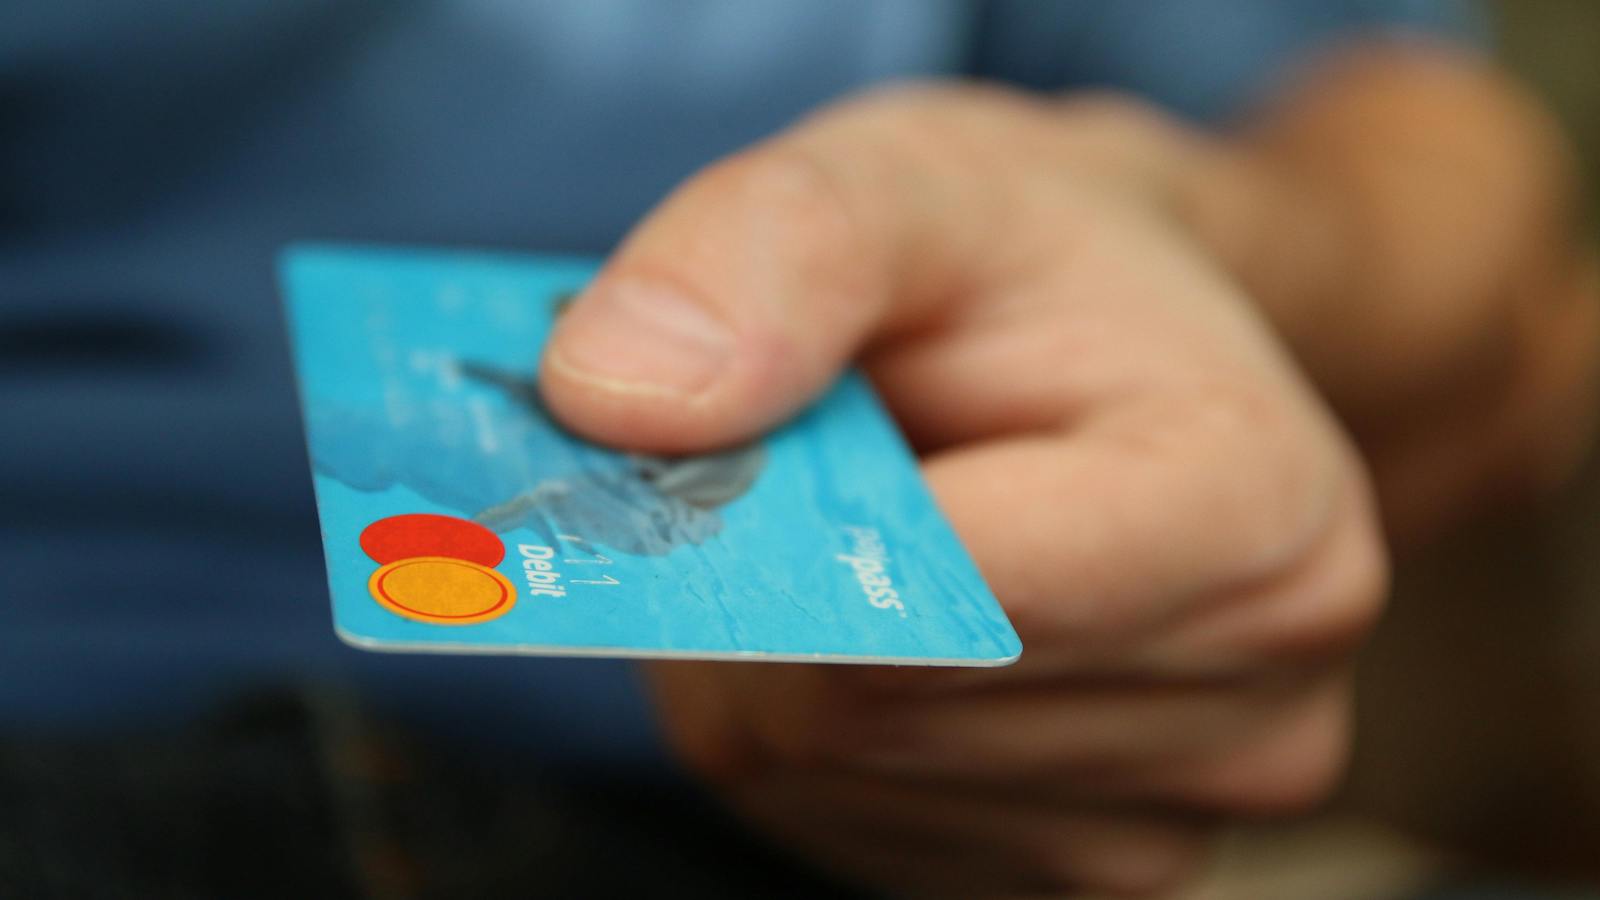 Person holds debit card